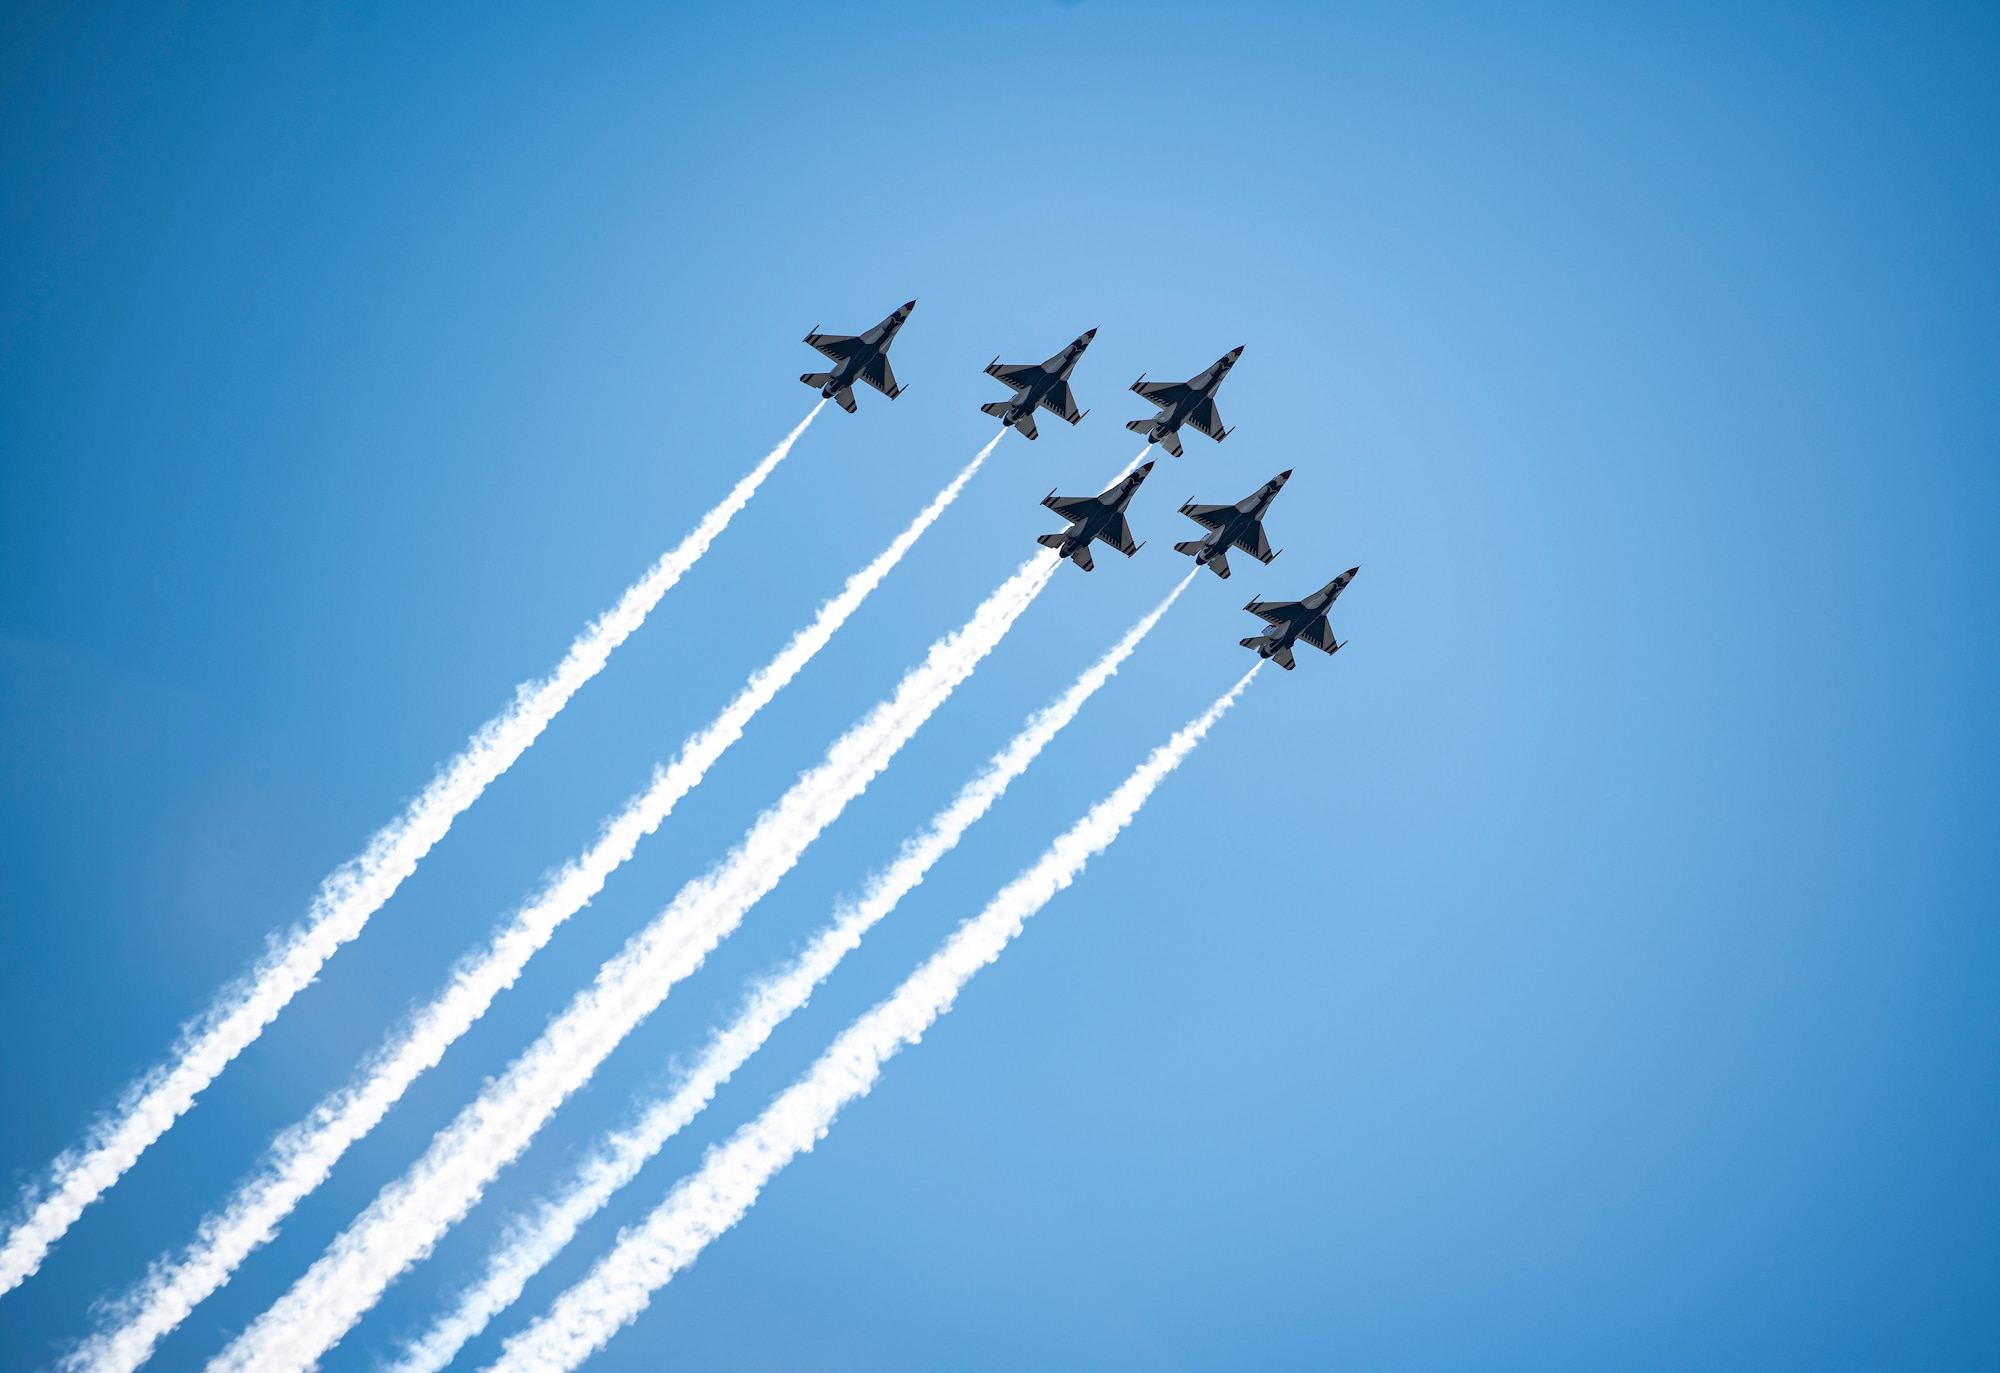 The U.S. Air Force Thunderbirds conduct a flyover through Joint Base McGuire-Dix-Lakehurst, N.J., April 28, 2020. The demonstration teams conducted flyovers in areas of New York, New Jersey and Pennsylvania to honor healthcare workers, first responders, and other essential personnel who are working on the front lines to combat COVID-19.  (U.S. Air Force photo by Senior Airman Ariel Owings)